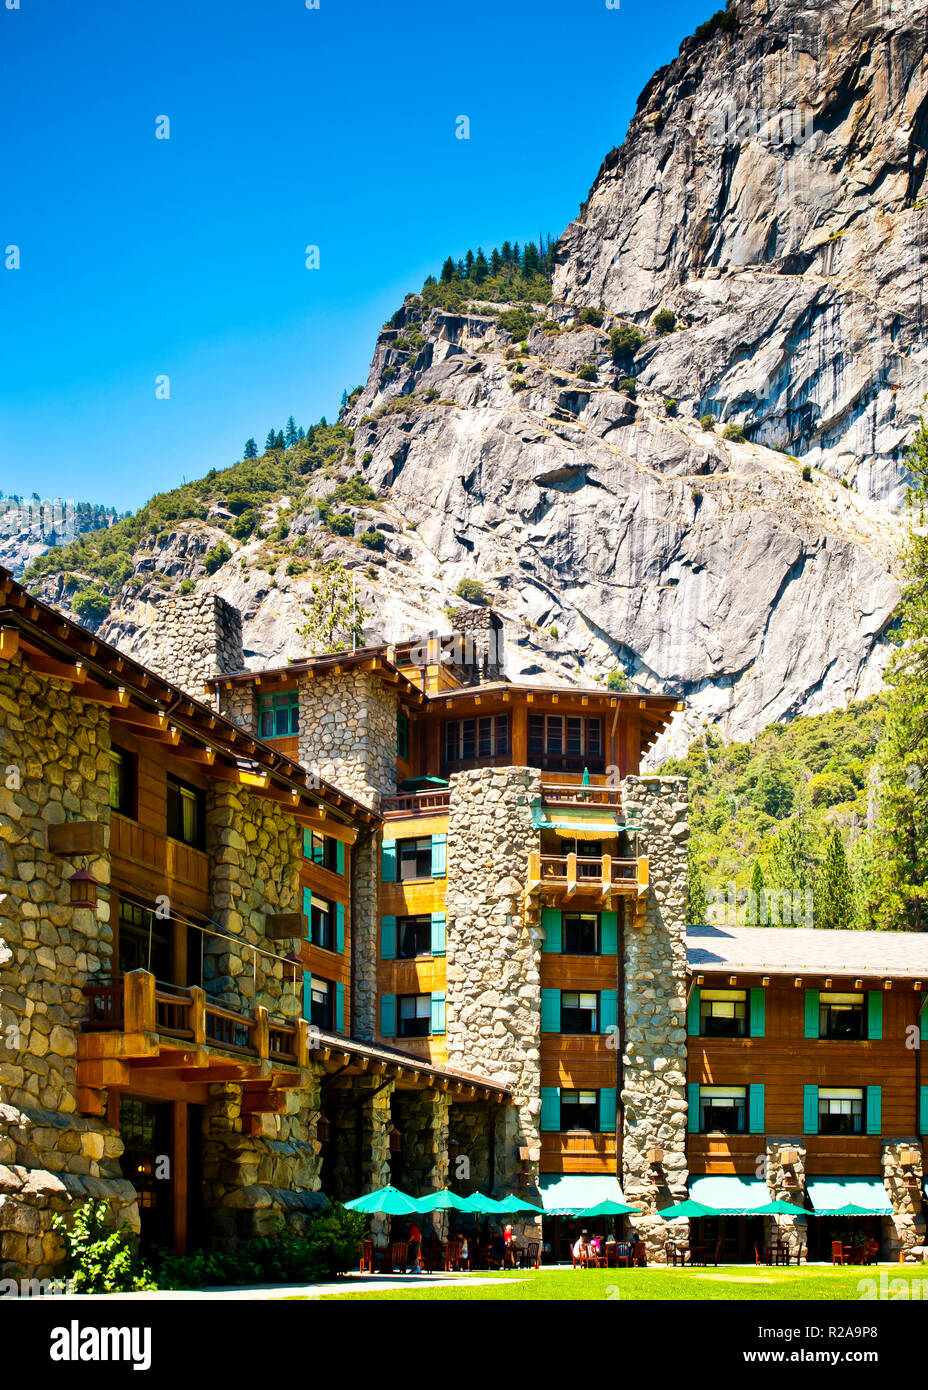 formal know as the hotel majestic now renamed Ahwahnee hotel nestling in the Yosemite National park,built from timber and wood.California,USA. Stock Photo